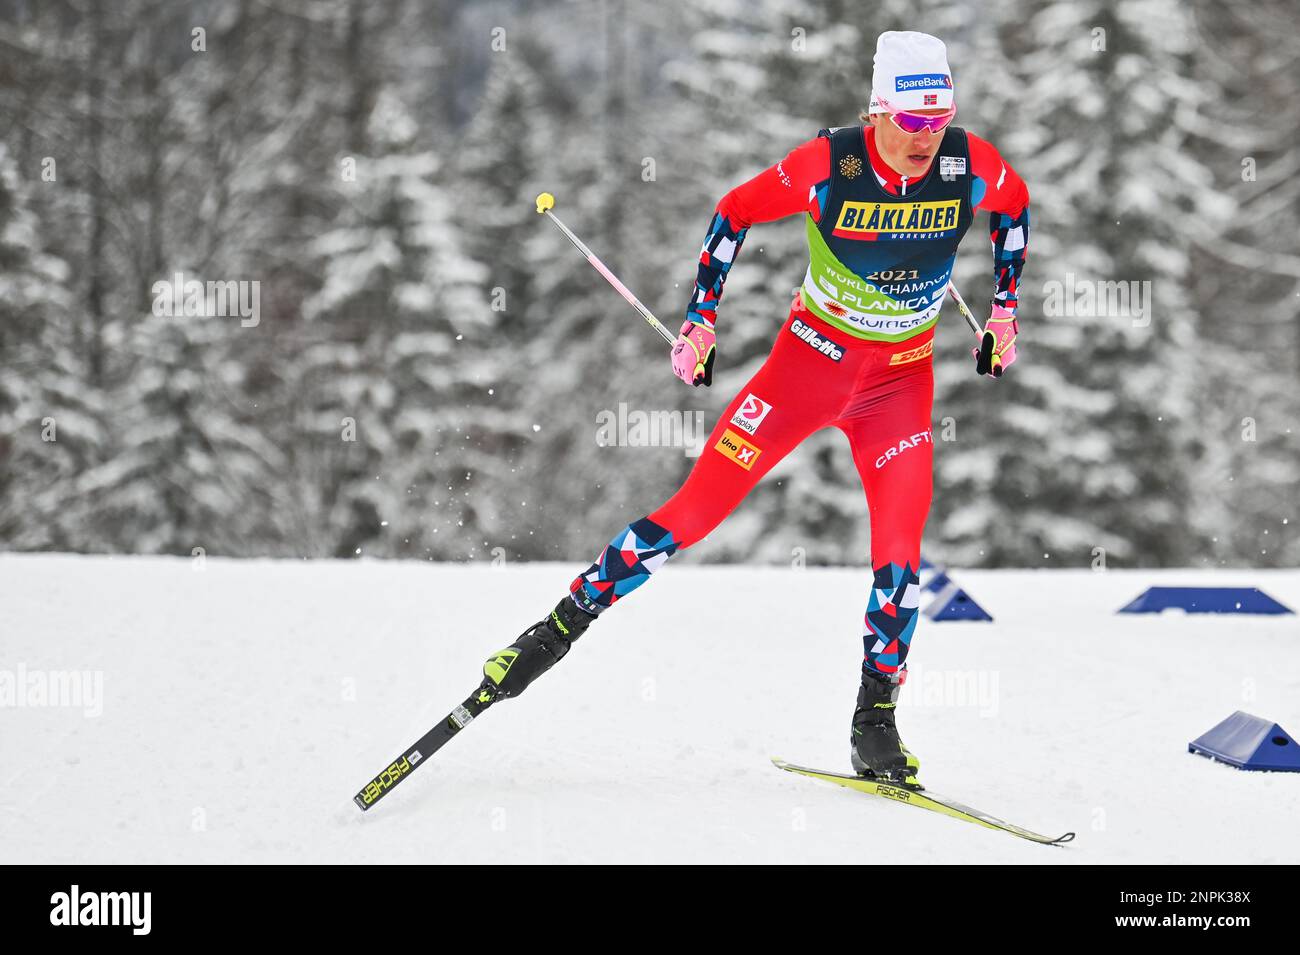 Planica, Slovenia. 26th Feb, 2023. Norwegian Johannes Hoesflot Klaebo en route to taking the gold medal in the team sprint at the 2023 FIS World Nordic Ski Championships in Planica, Slovenia, February 26, 2023 with his teammate Paal Golberg. John Lazenby/Alamy Live News Credit: John Candler Lazenby/Alamy Live News Stock Photo